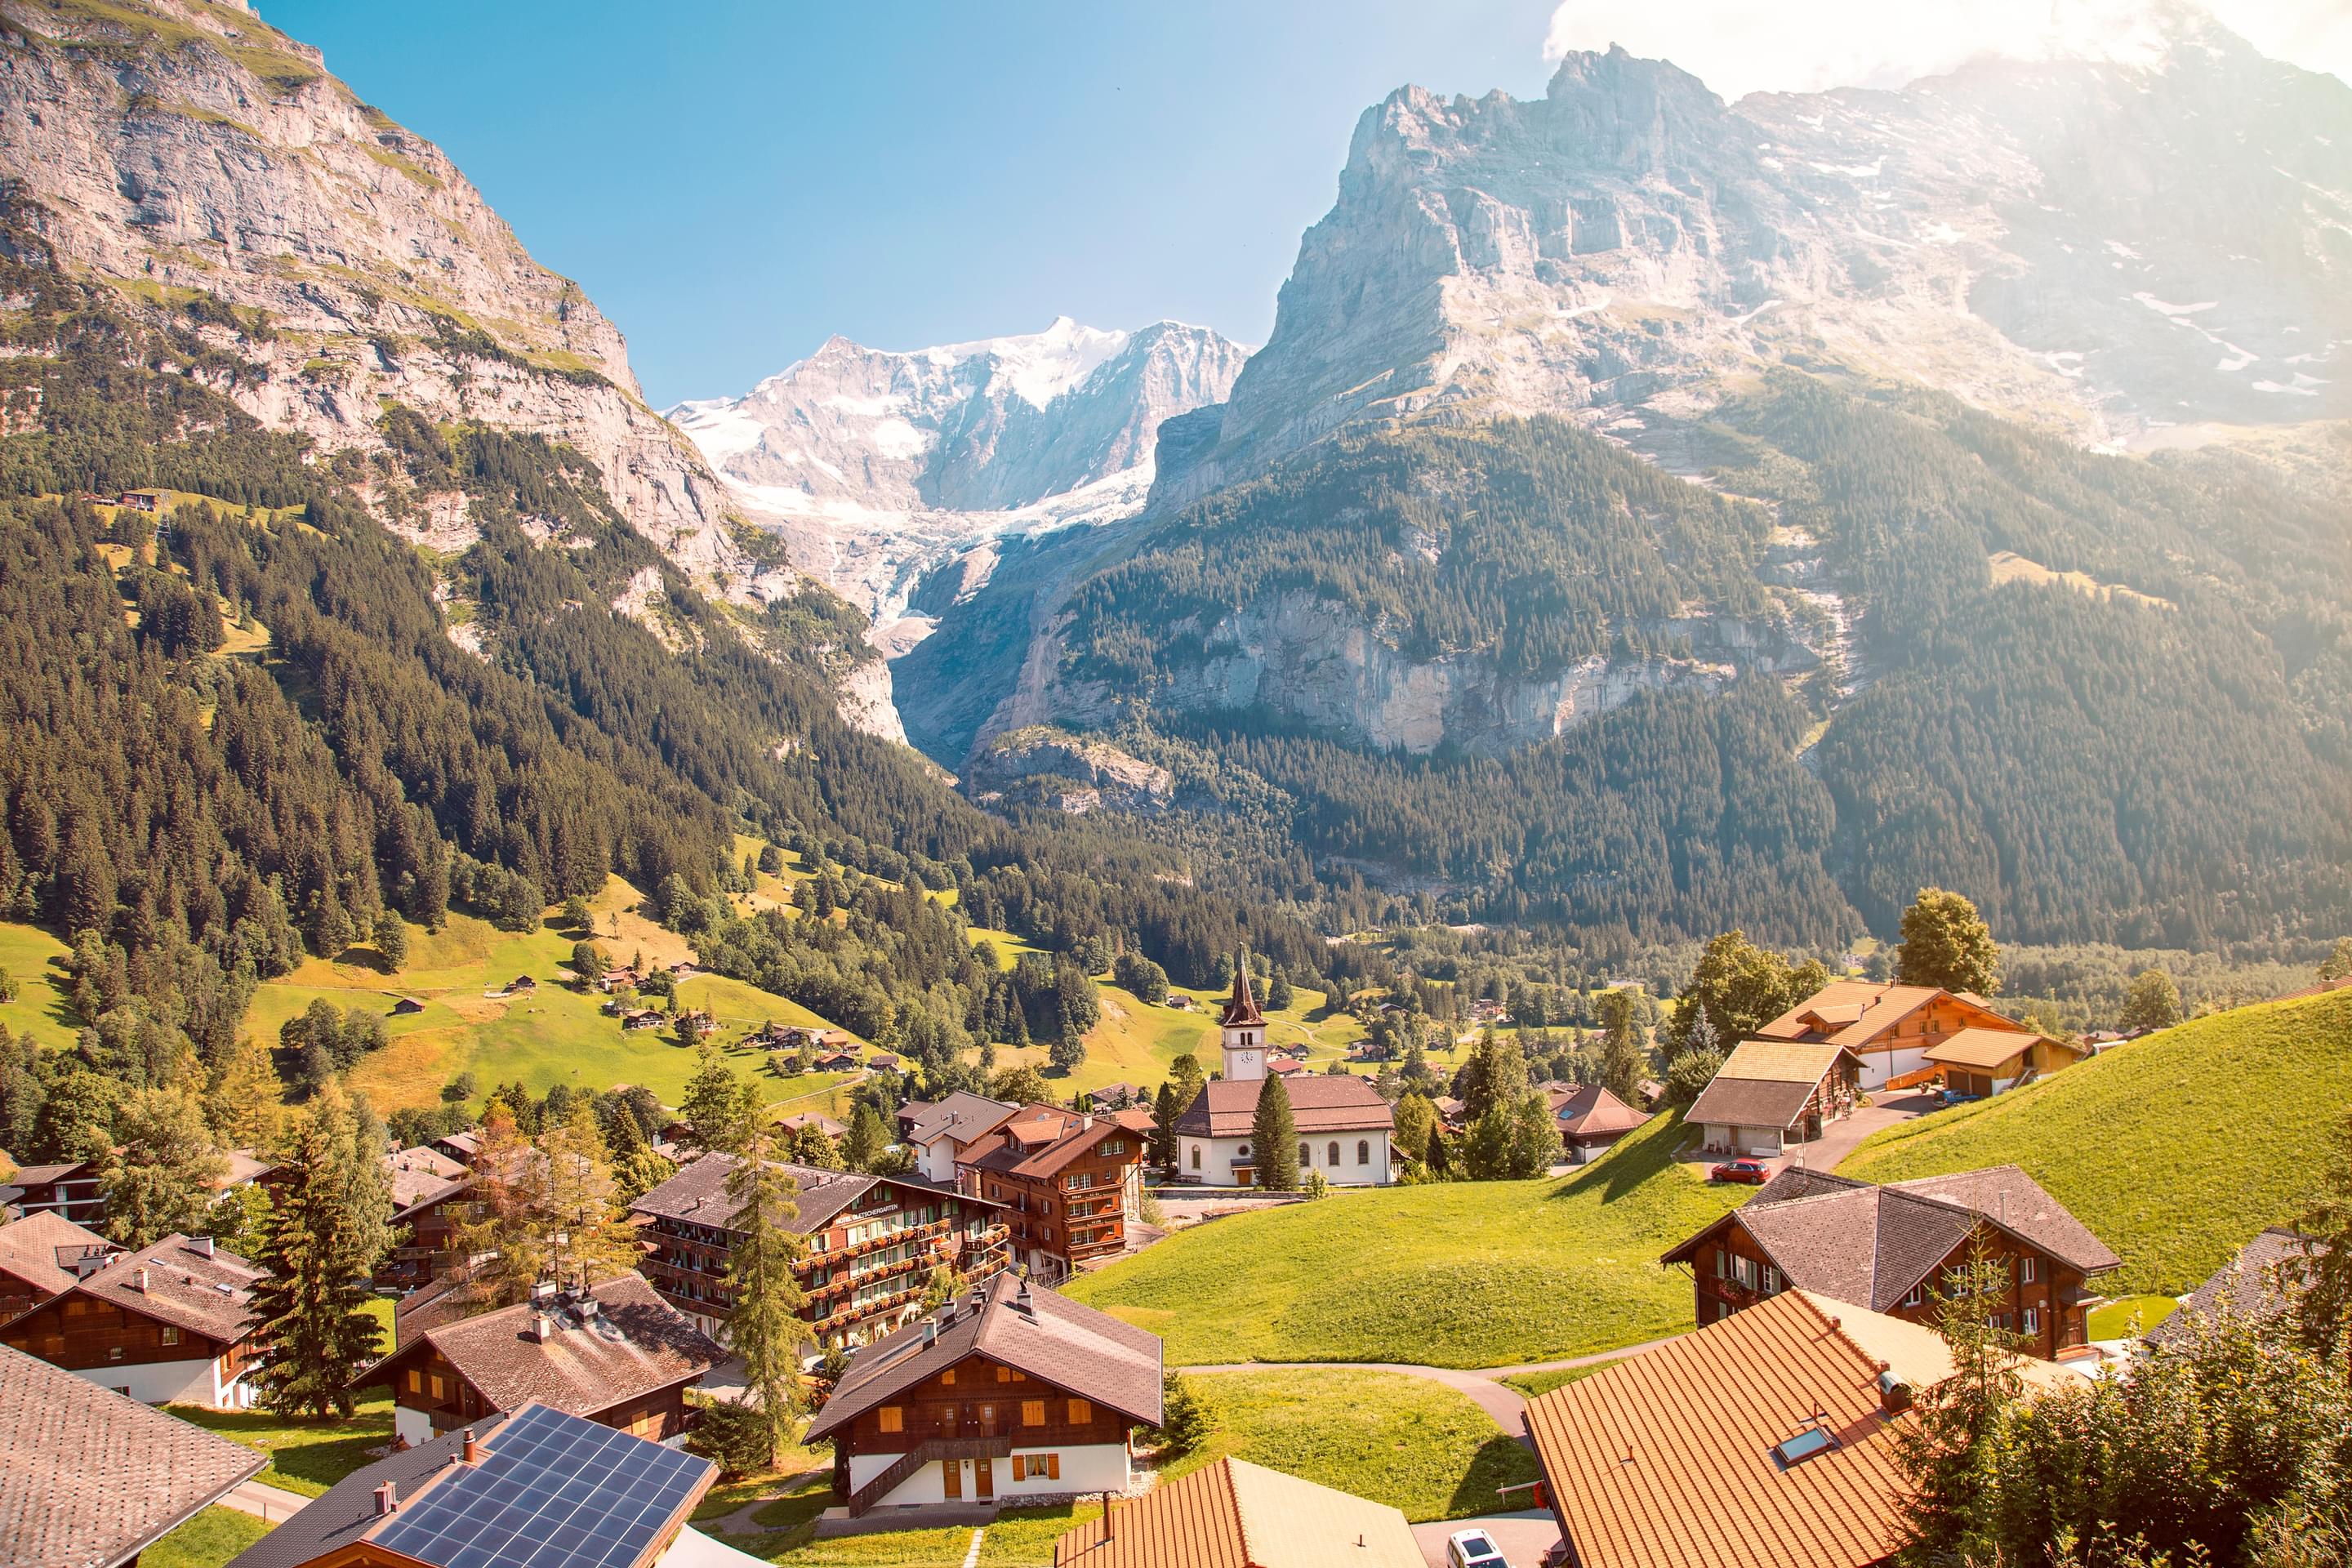 Things to Do in Grindelwald